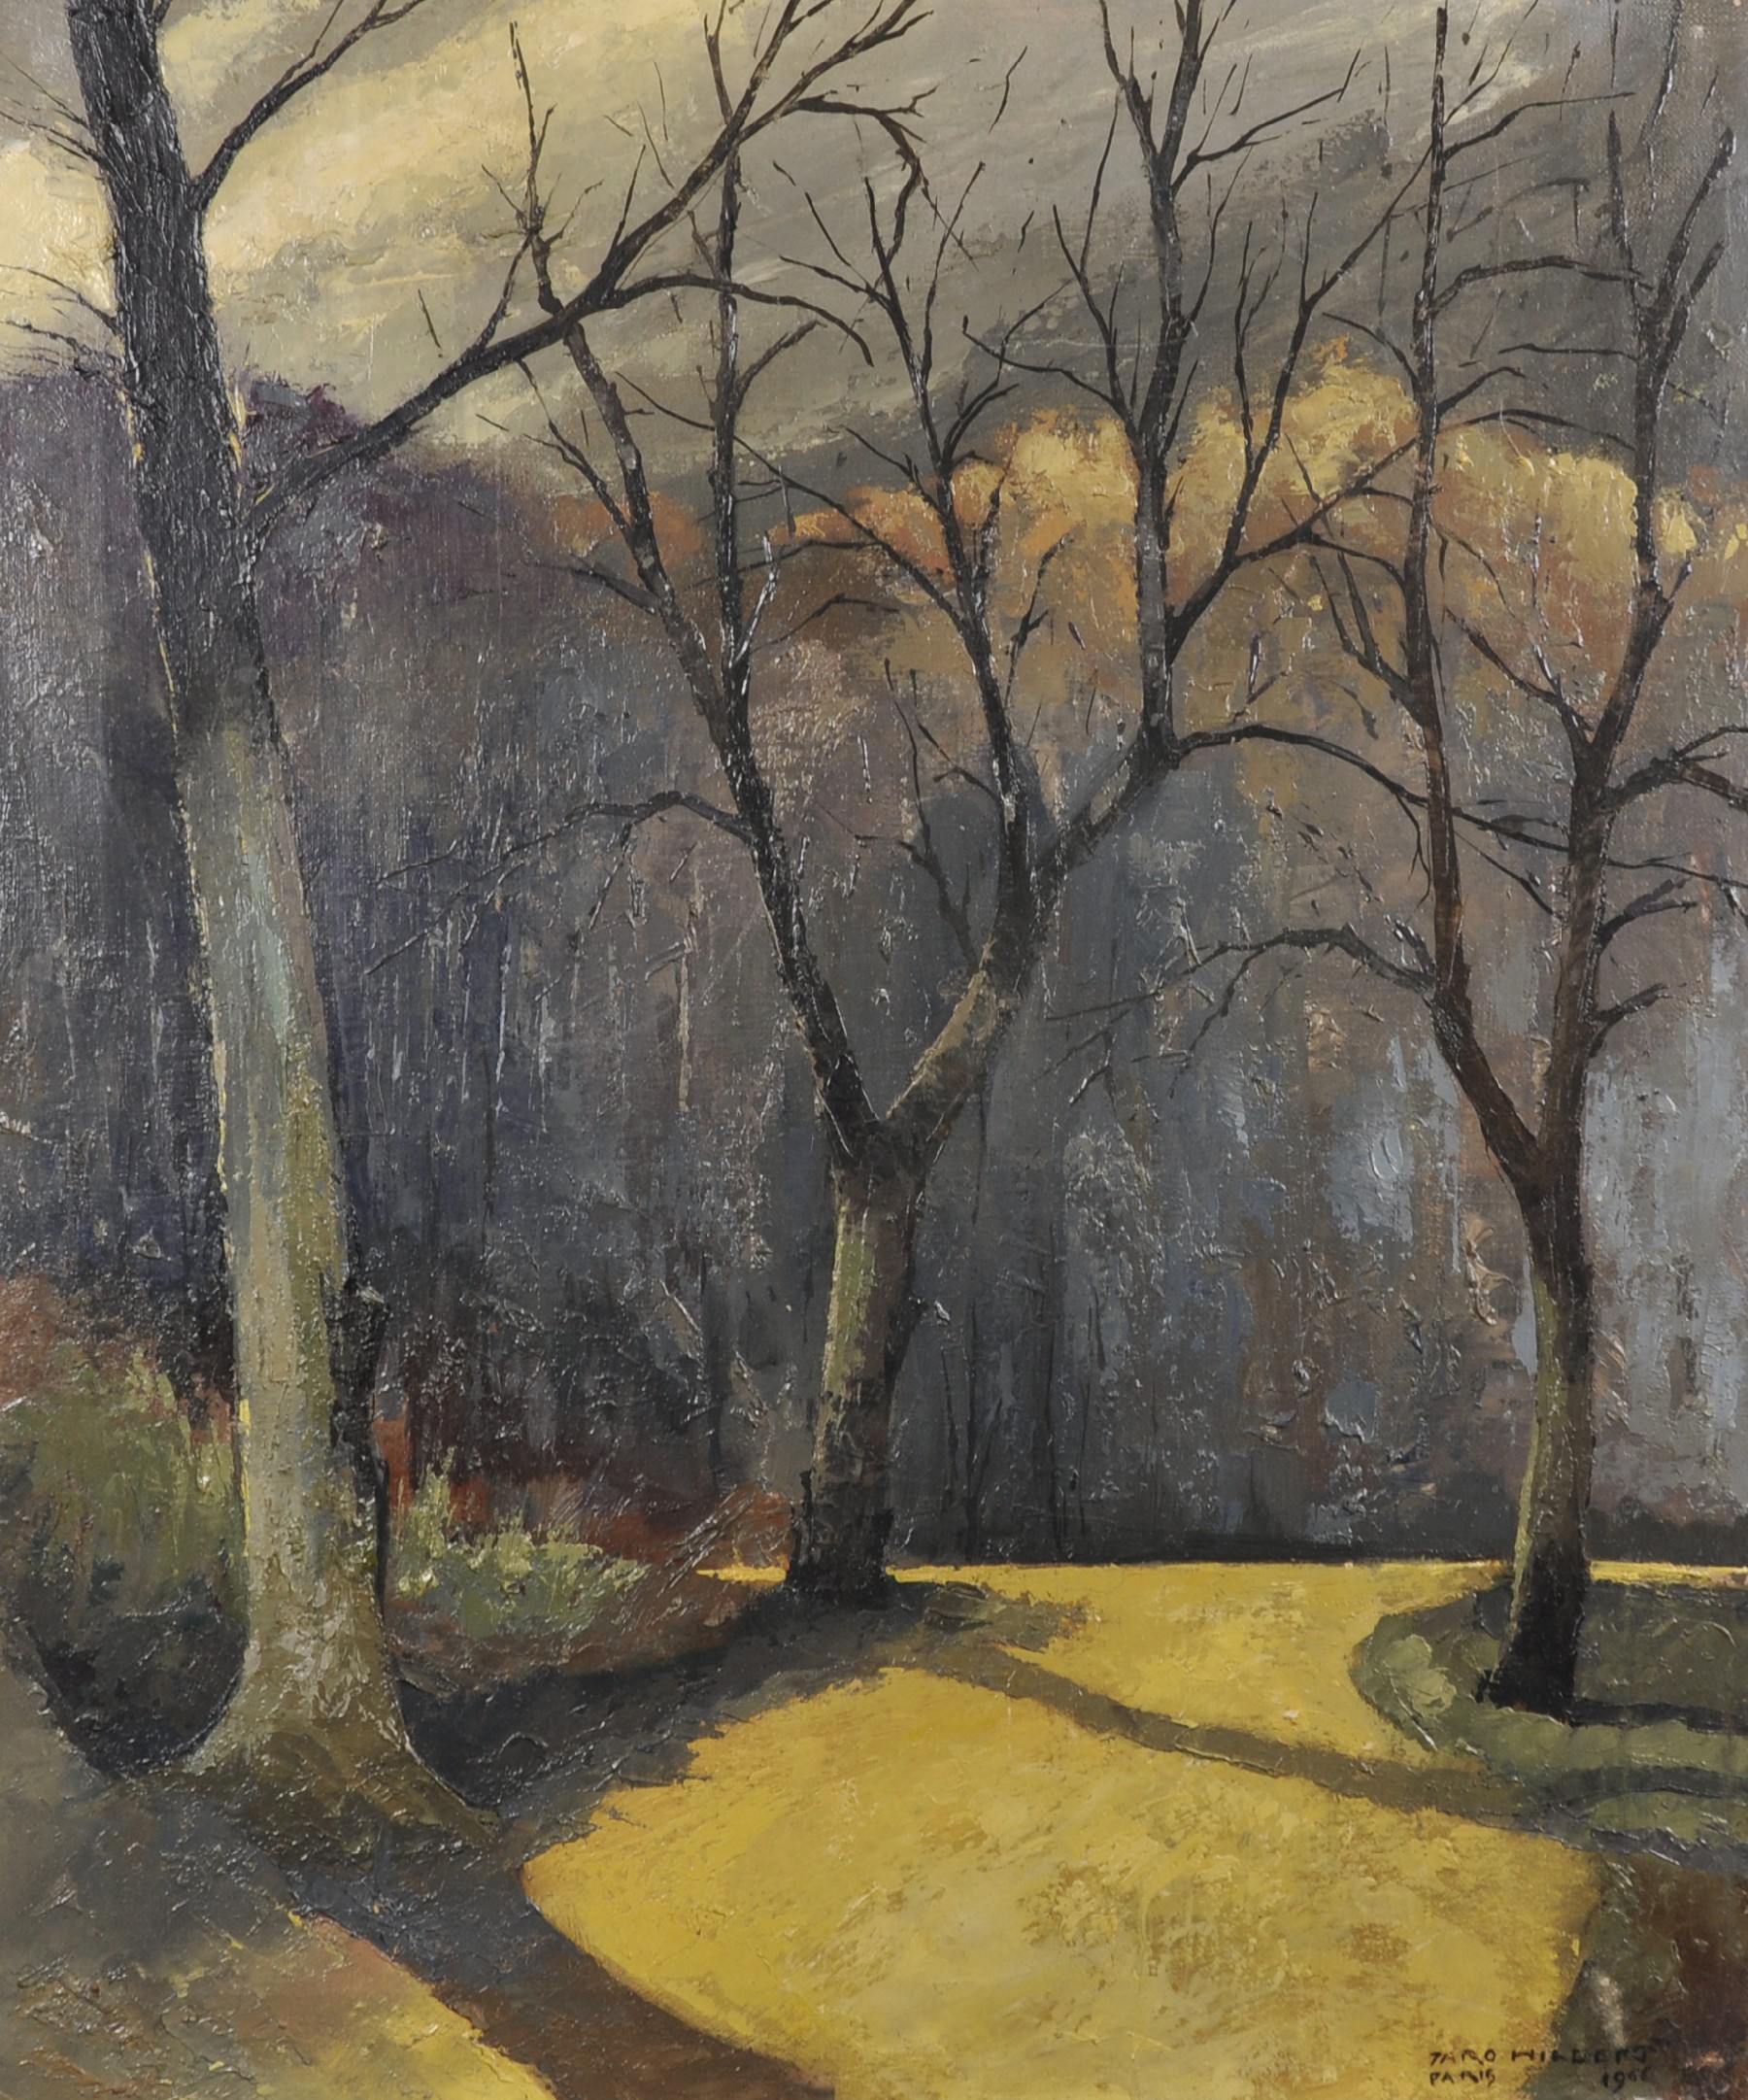 Jaro Hilbert (1897-1995) Slovenian/French. 'Soleil l'hiver', a Path Through the Woods, Oil on